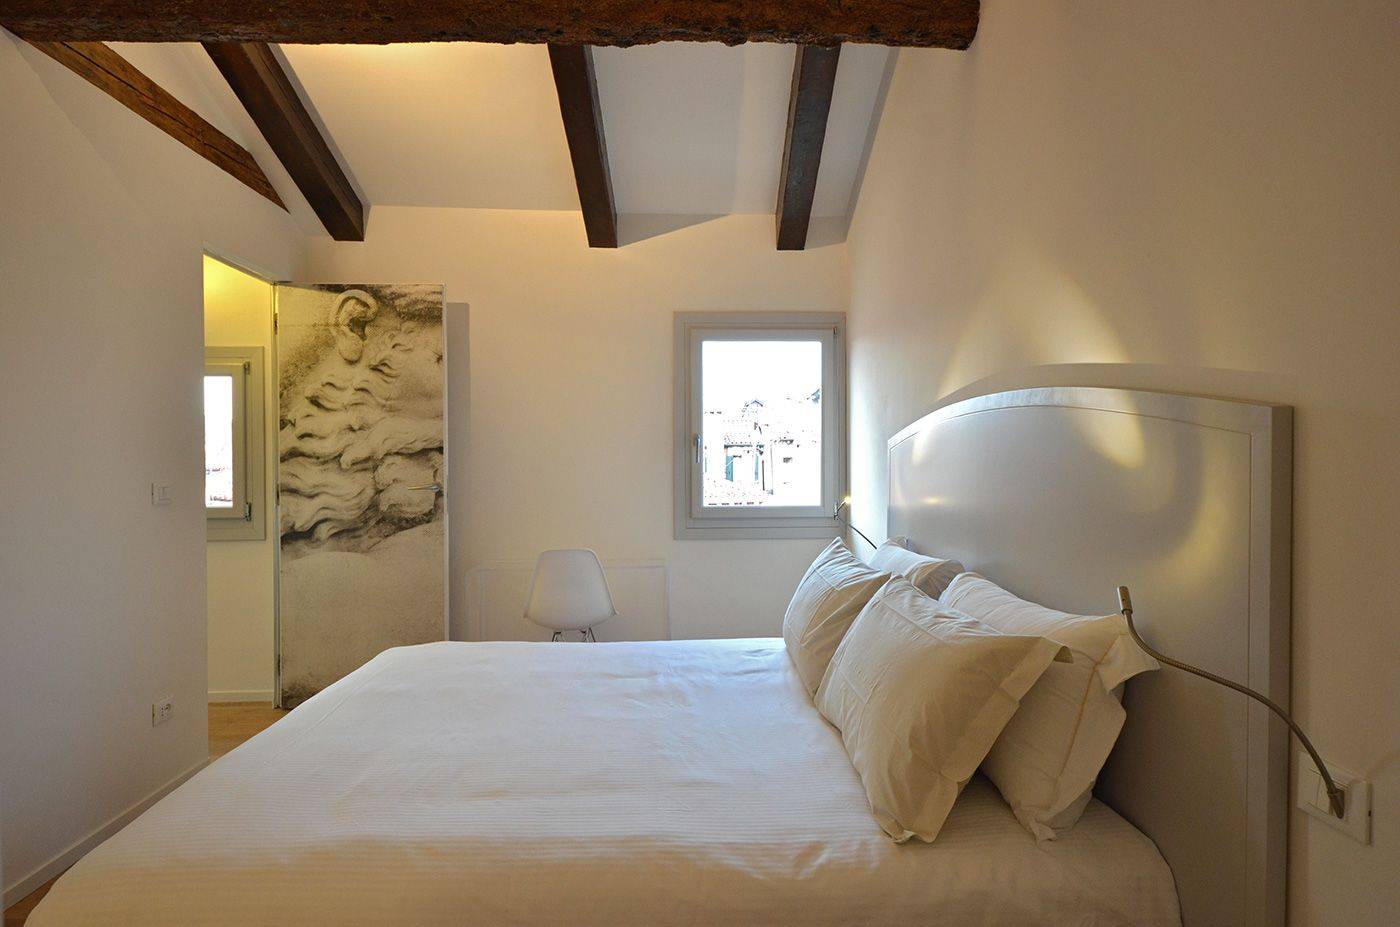 the bedroom features view on the roof-tops and wooden beams